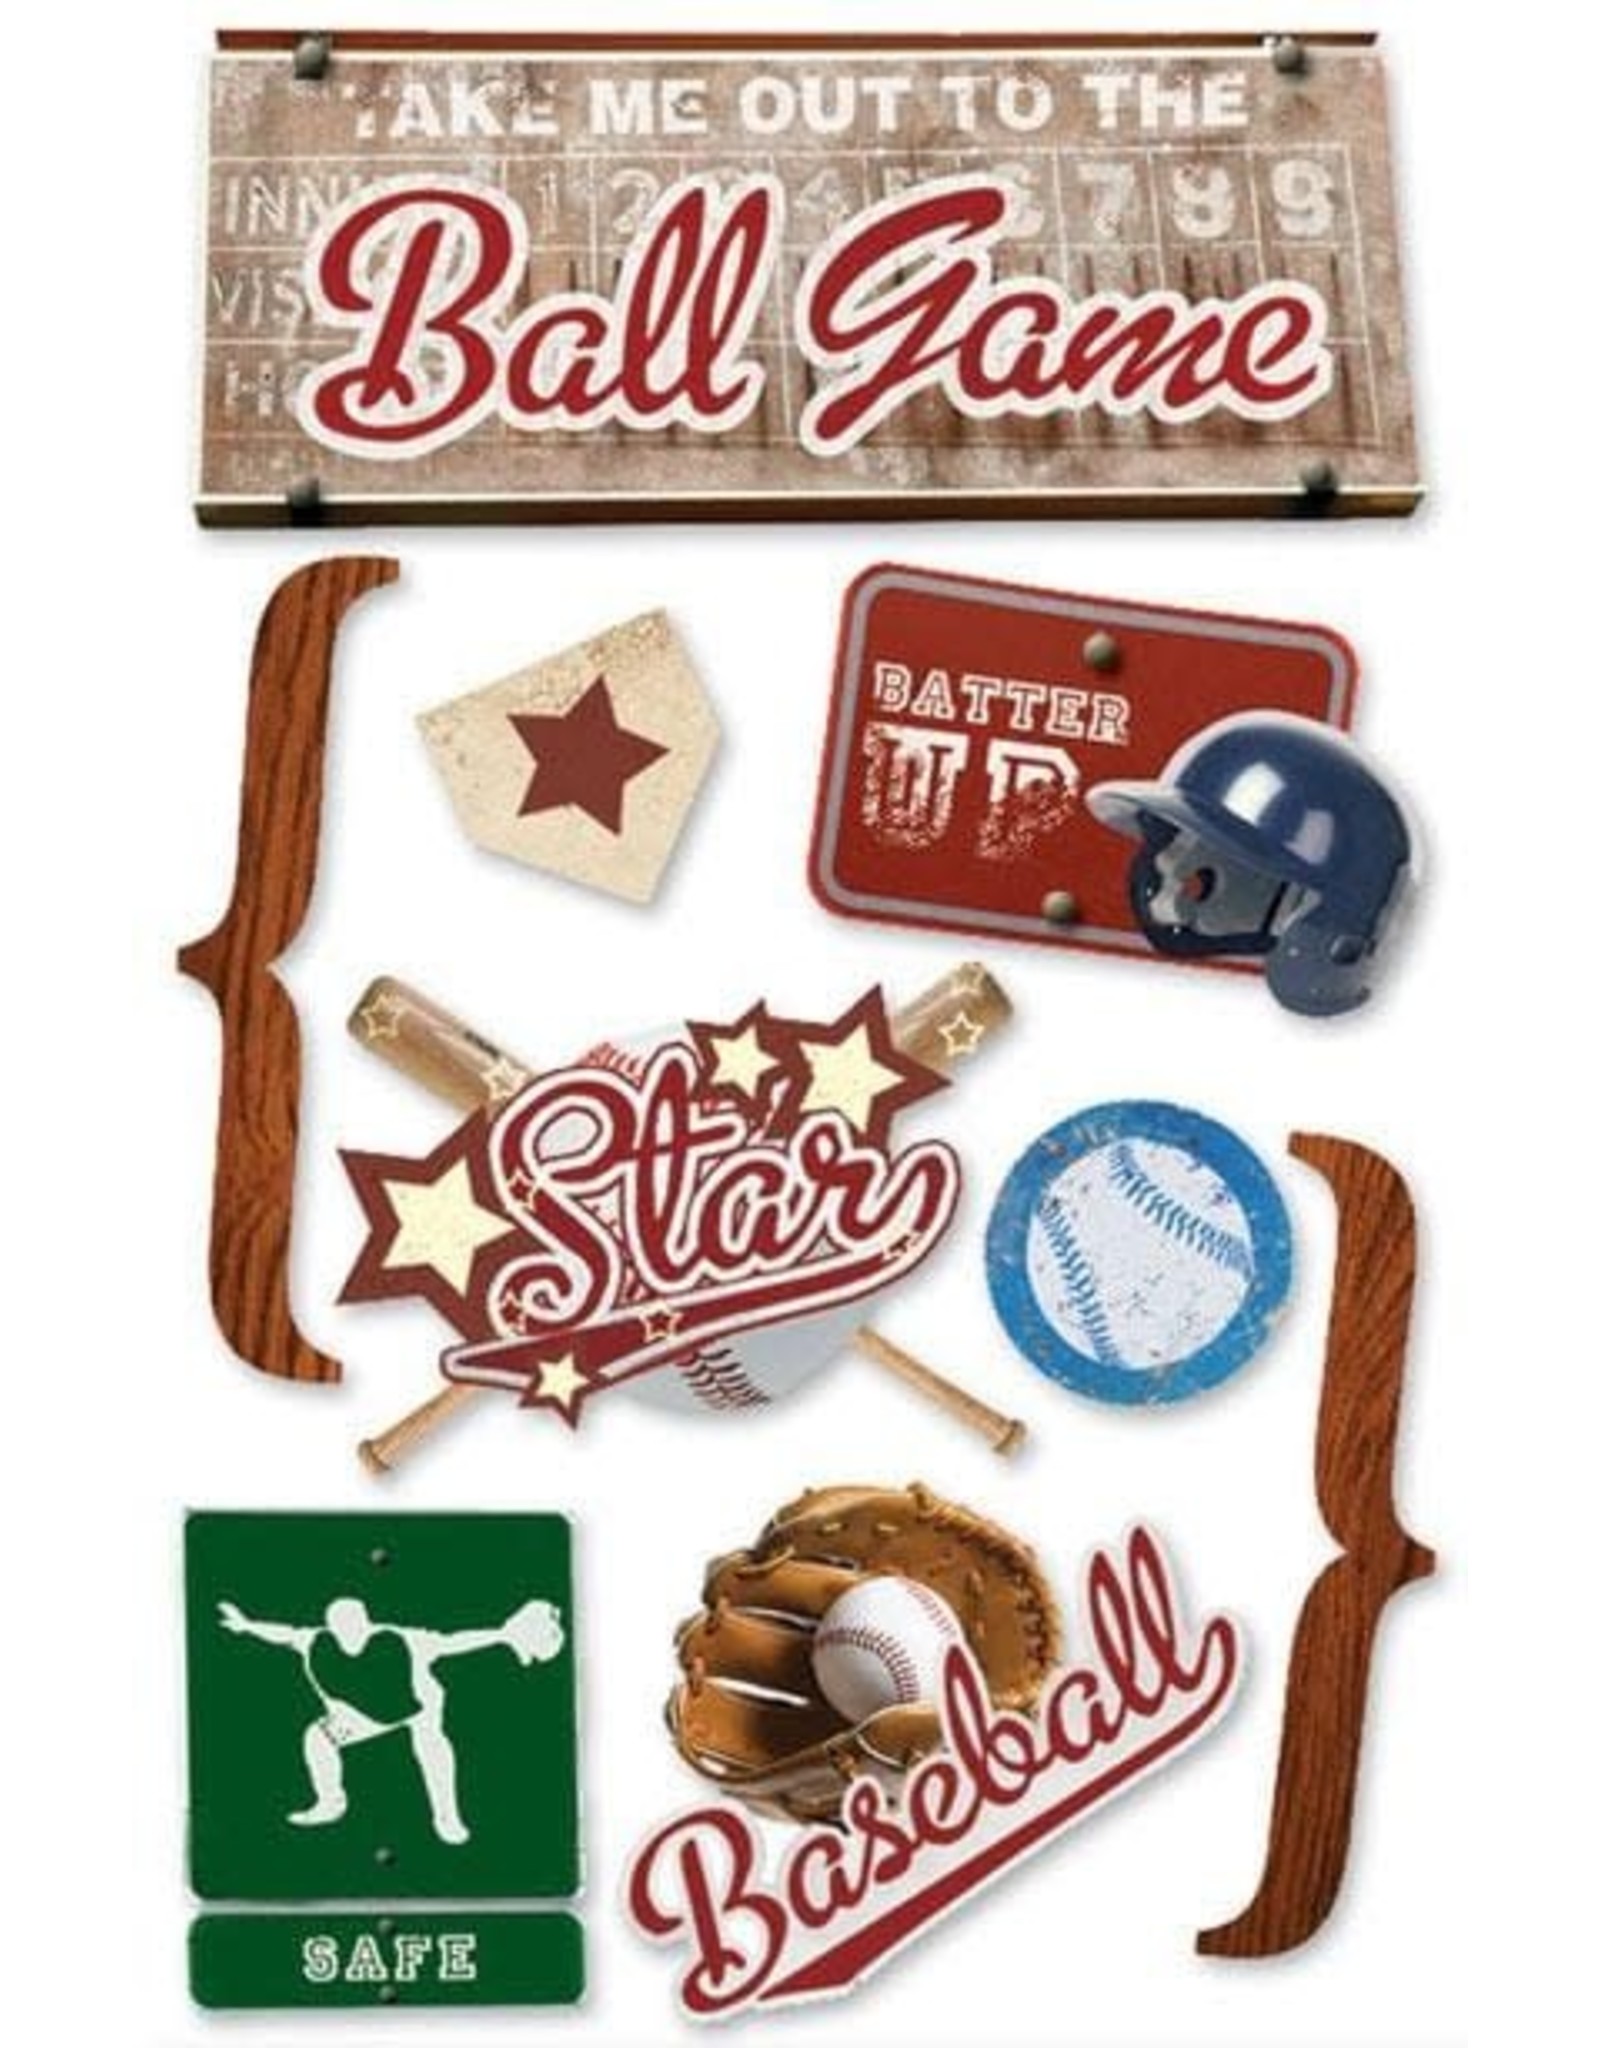 PAPER HOUSE PRODUCTIONS PAPER HOUSE BALL GAME 3D STICKERS